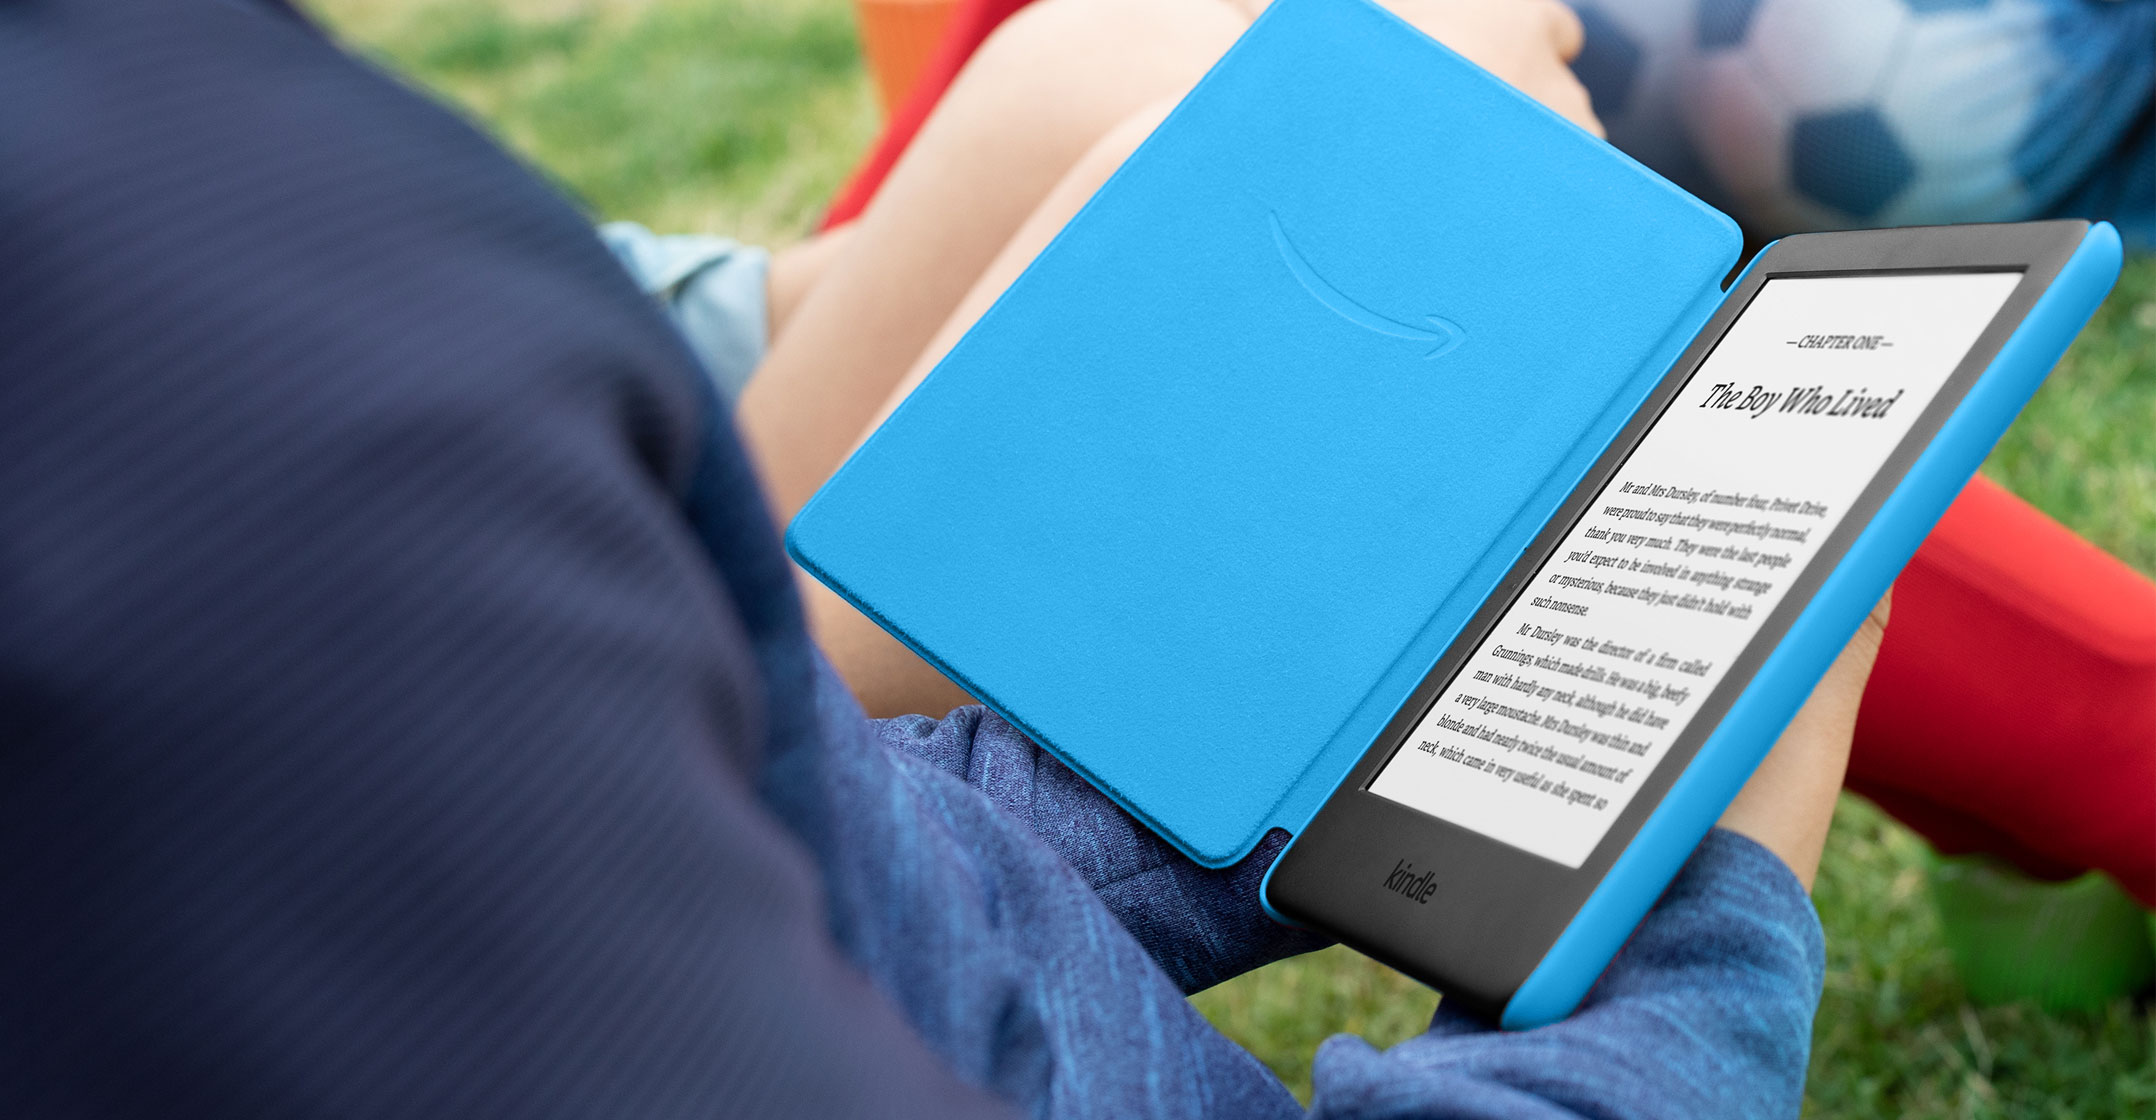 launches Kindle e-reader aimed at children